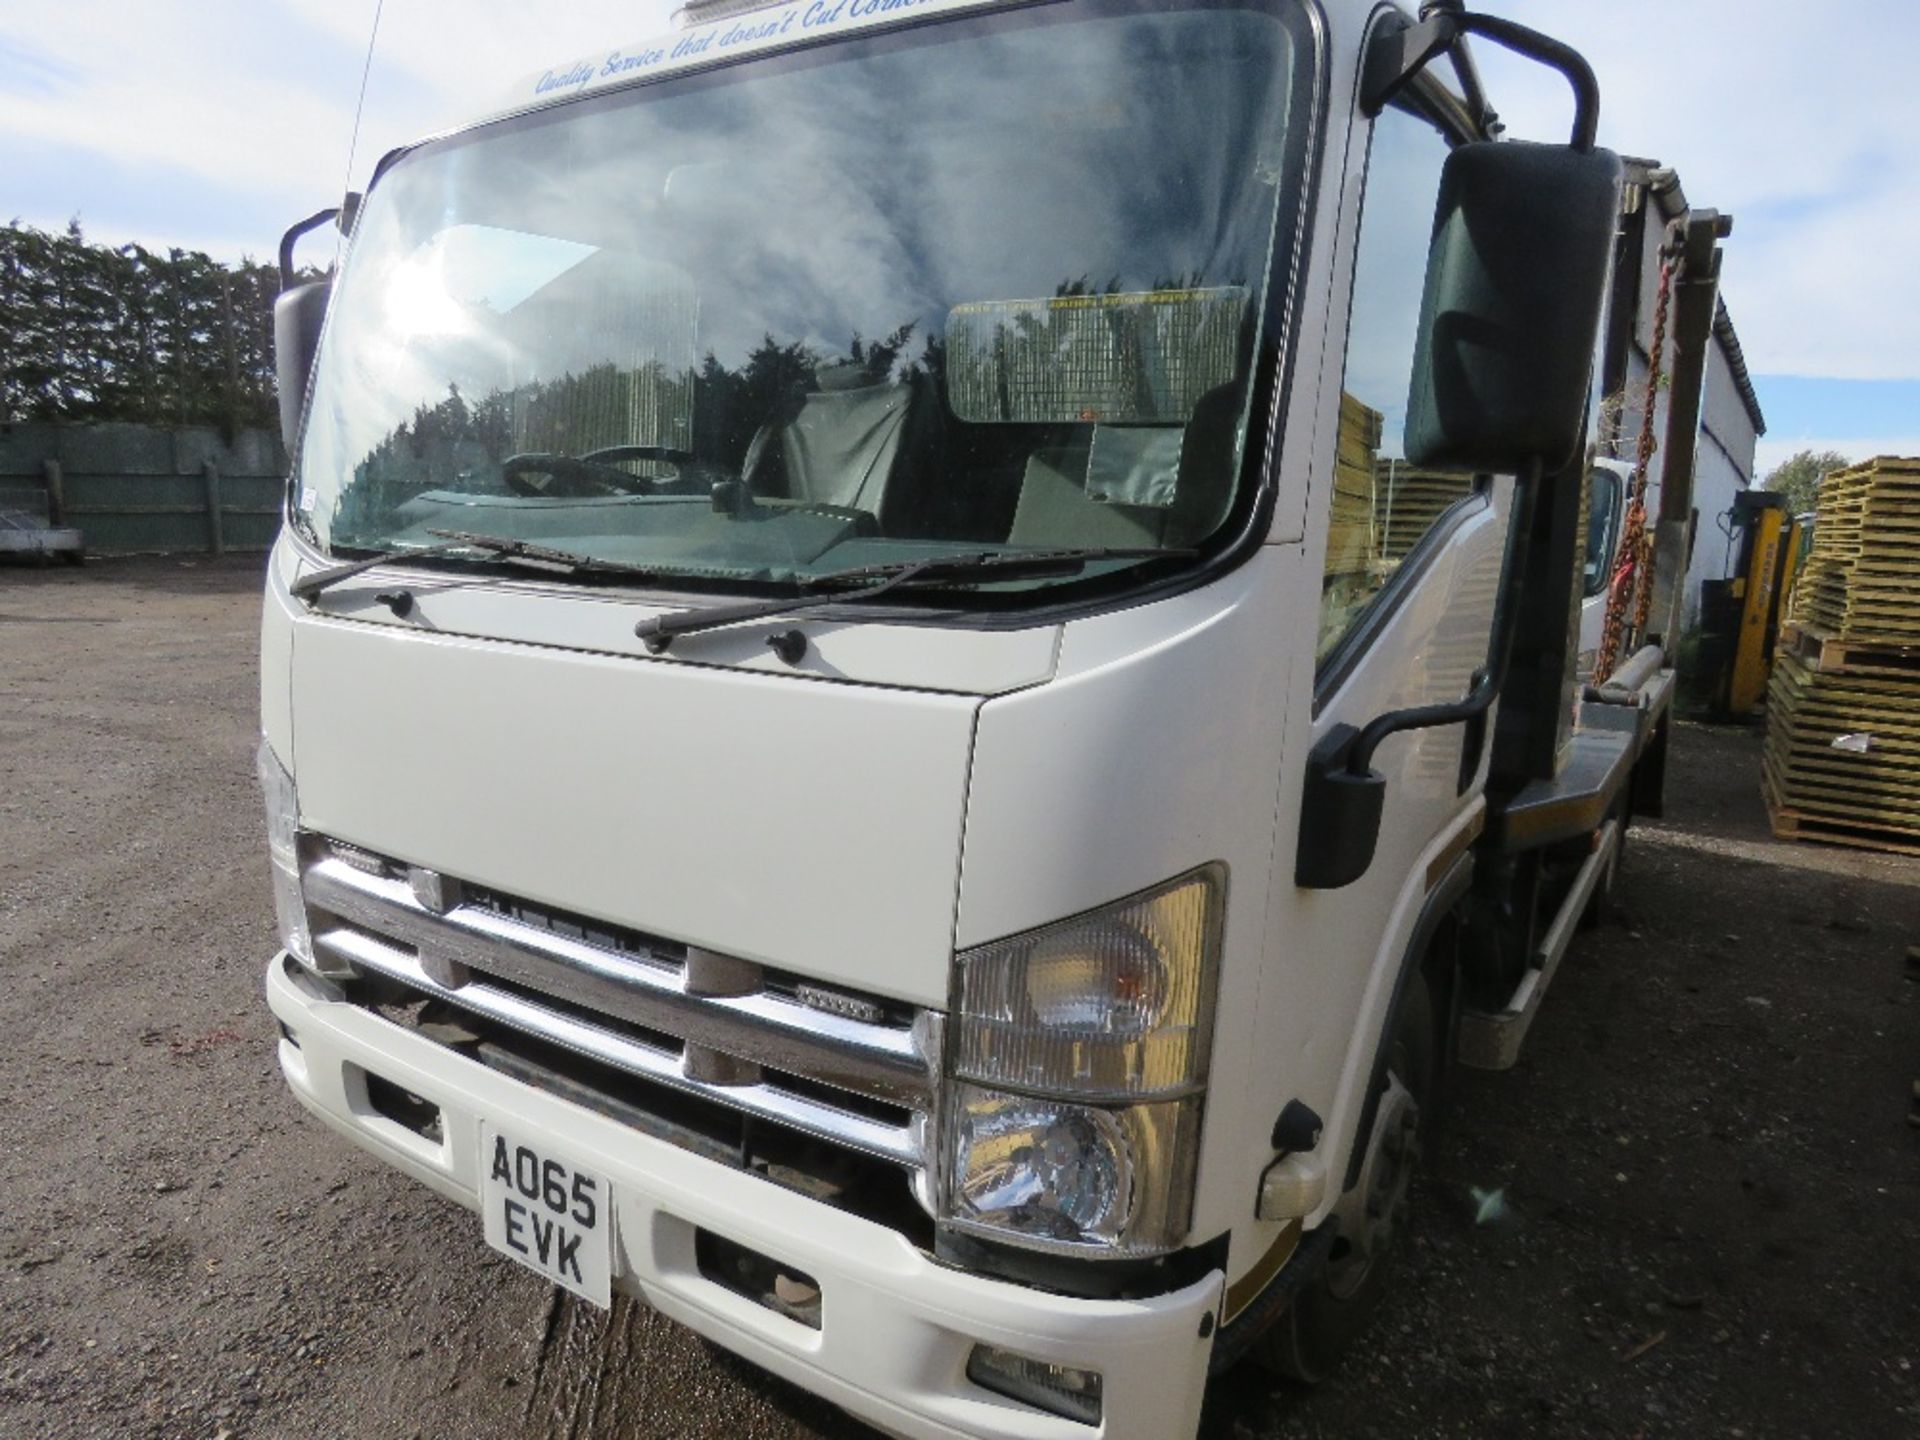 ISUZU N2R N75-150 7.5 TONNE SKIP LORRY REG: AO65 EVK. FIRST REGISTERED 12/11/2015 WITH V5. (CHECKED - Image 12 of 12